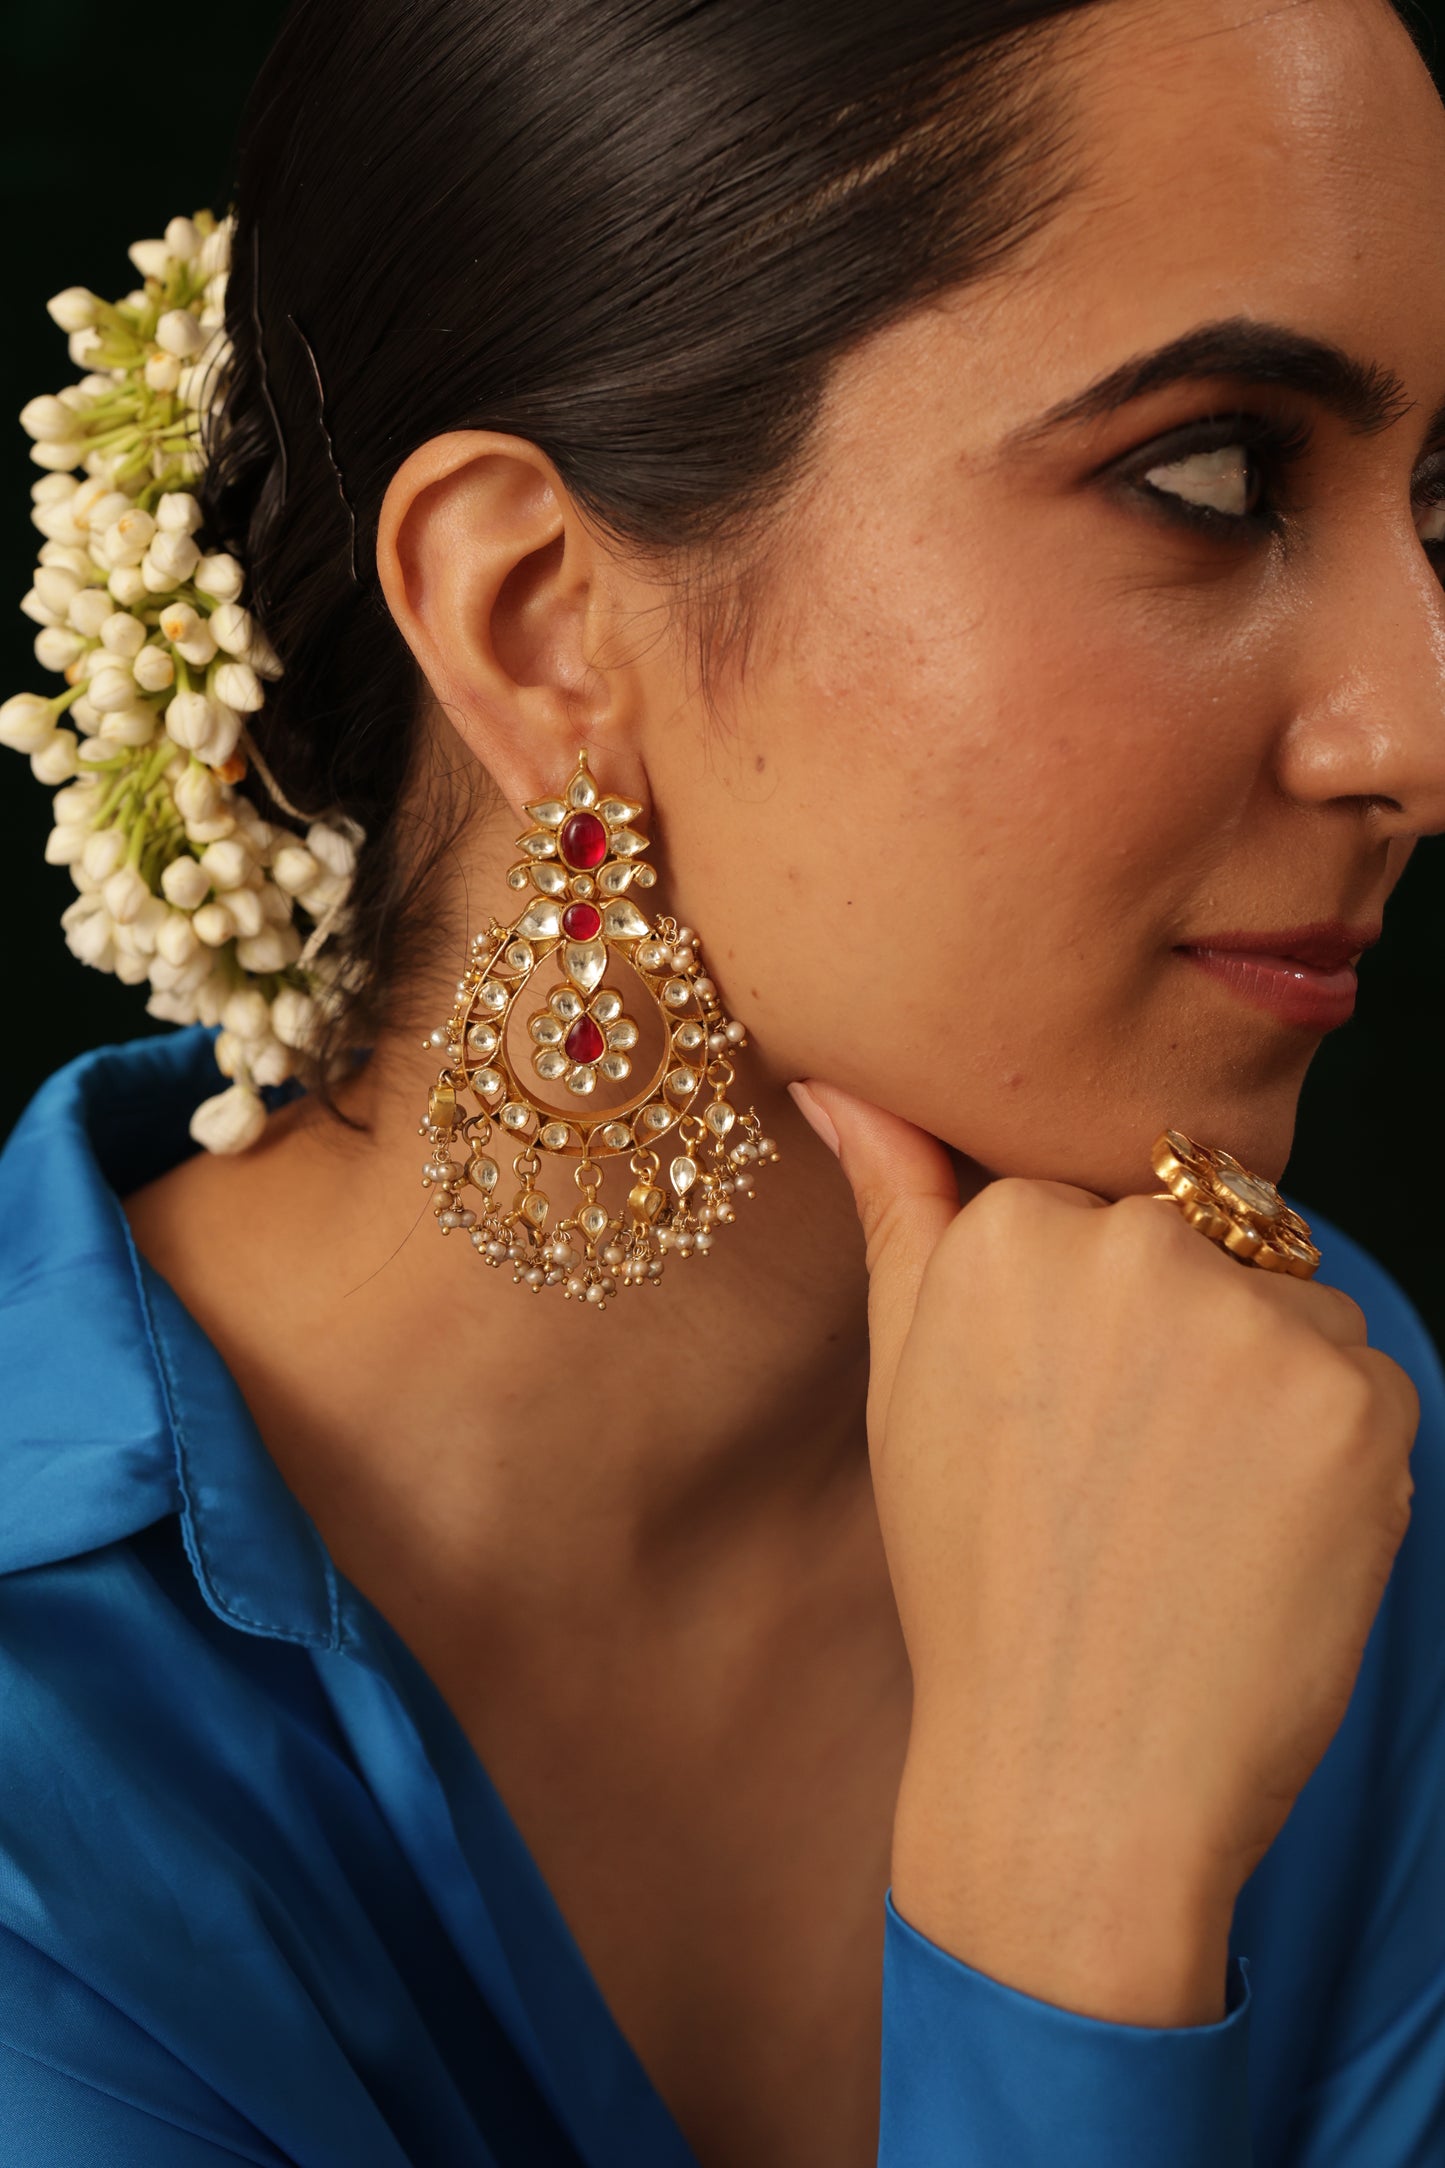 KRITI CRYSTAL STONE AND PEARLS WITH GOLD PLATED